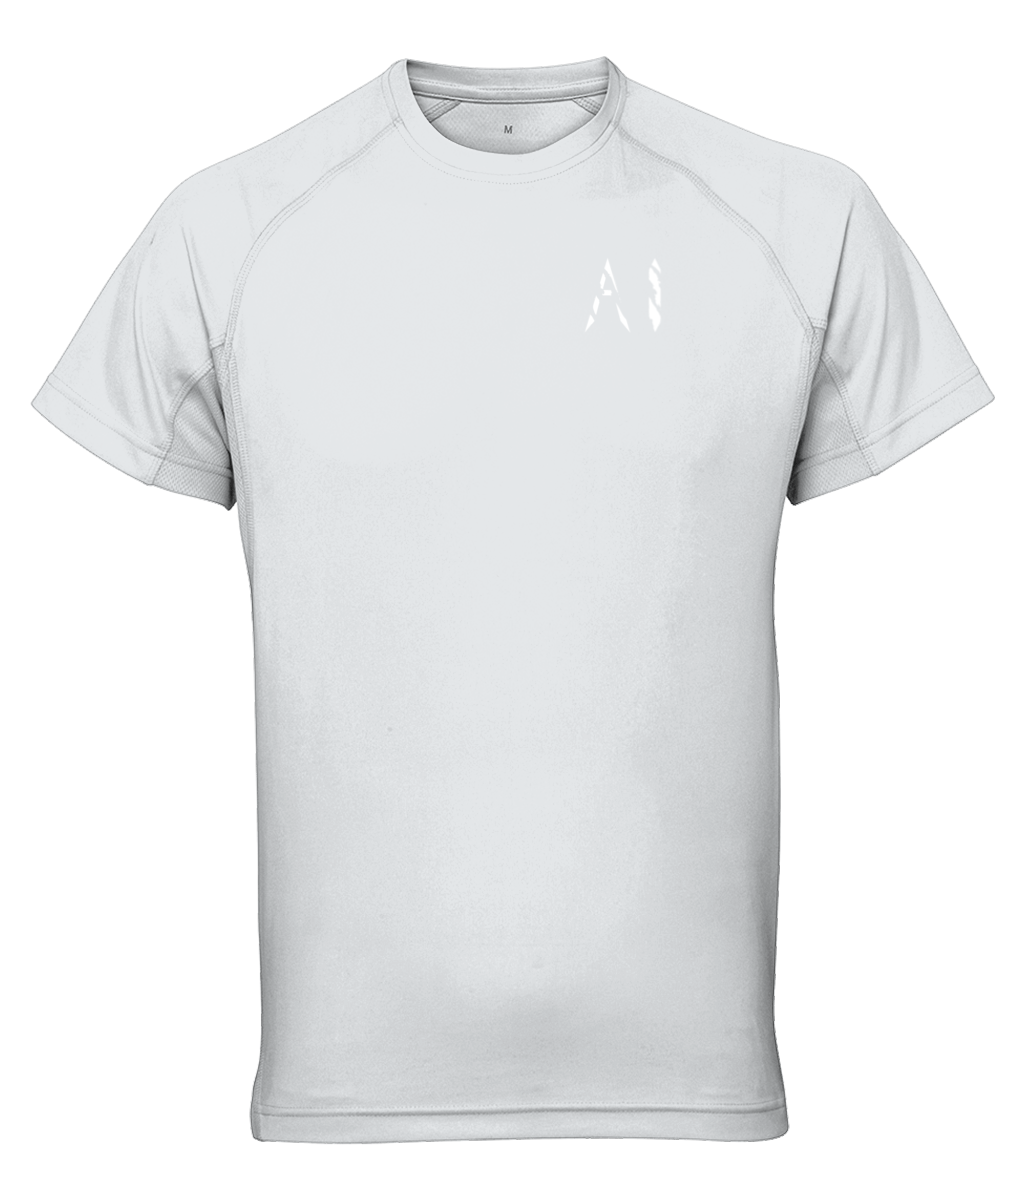 Womens light grey Athletic Performance Top with White AI logo on left breast